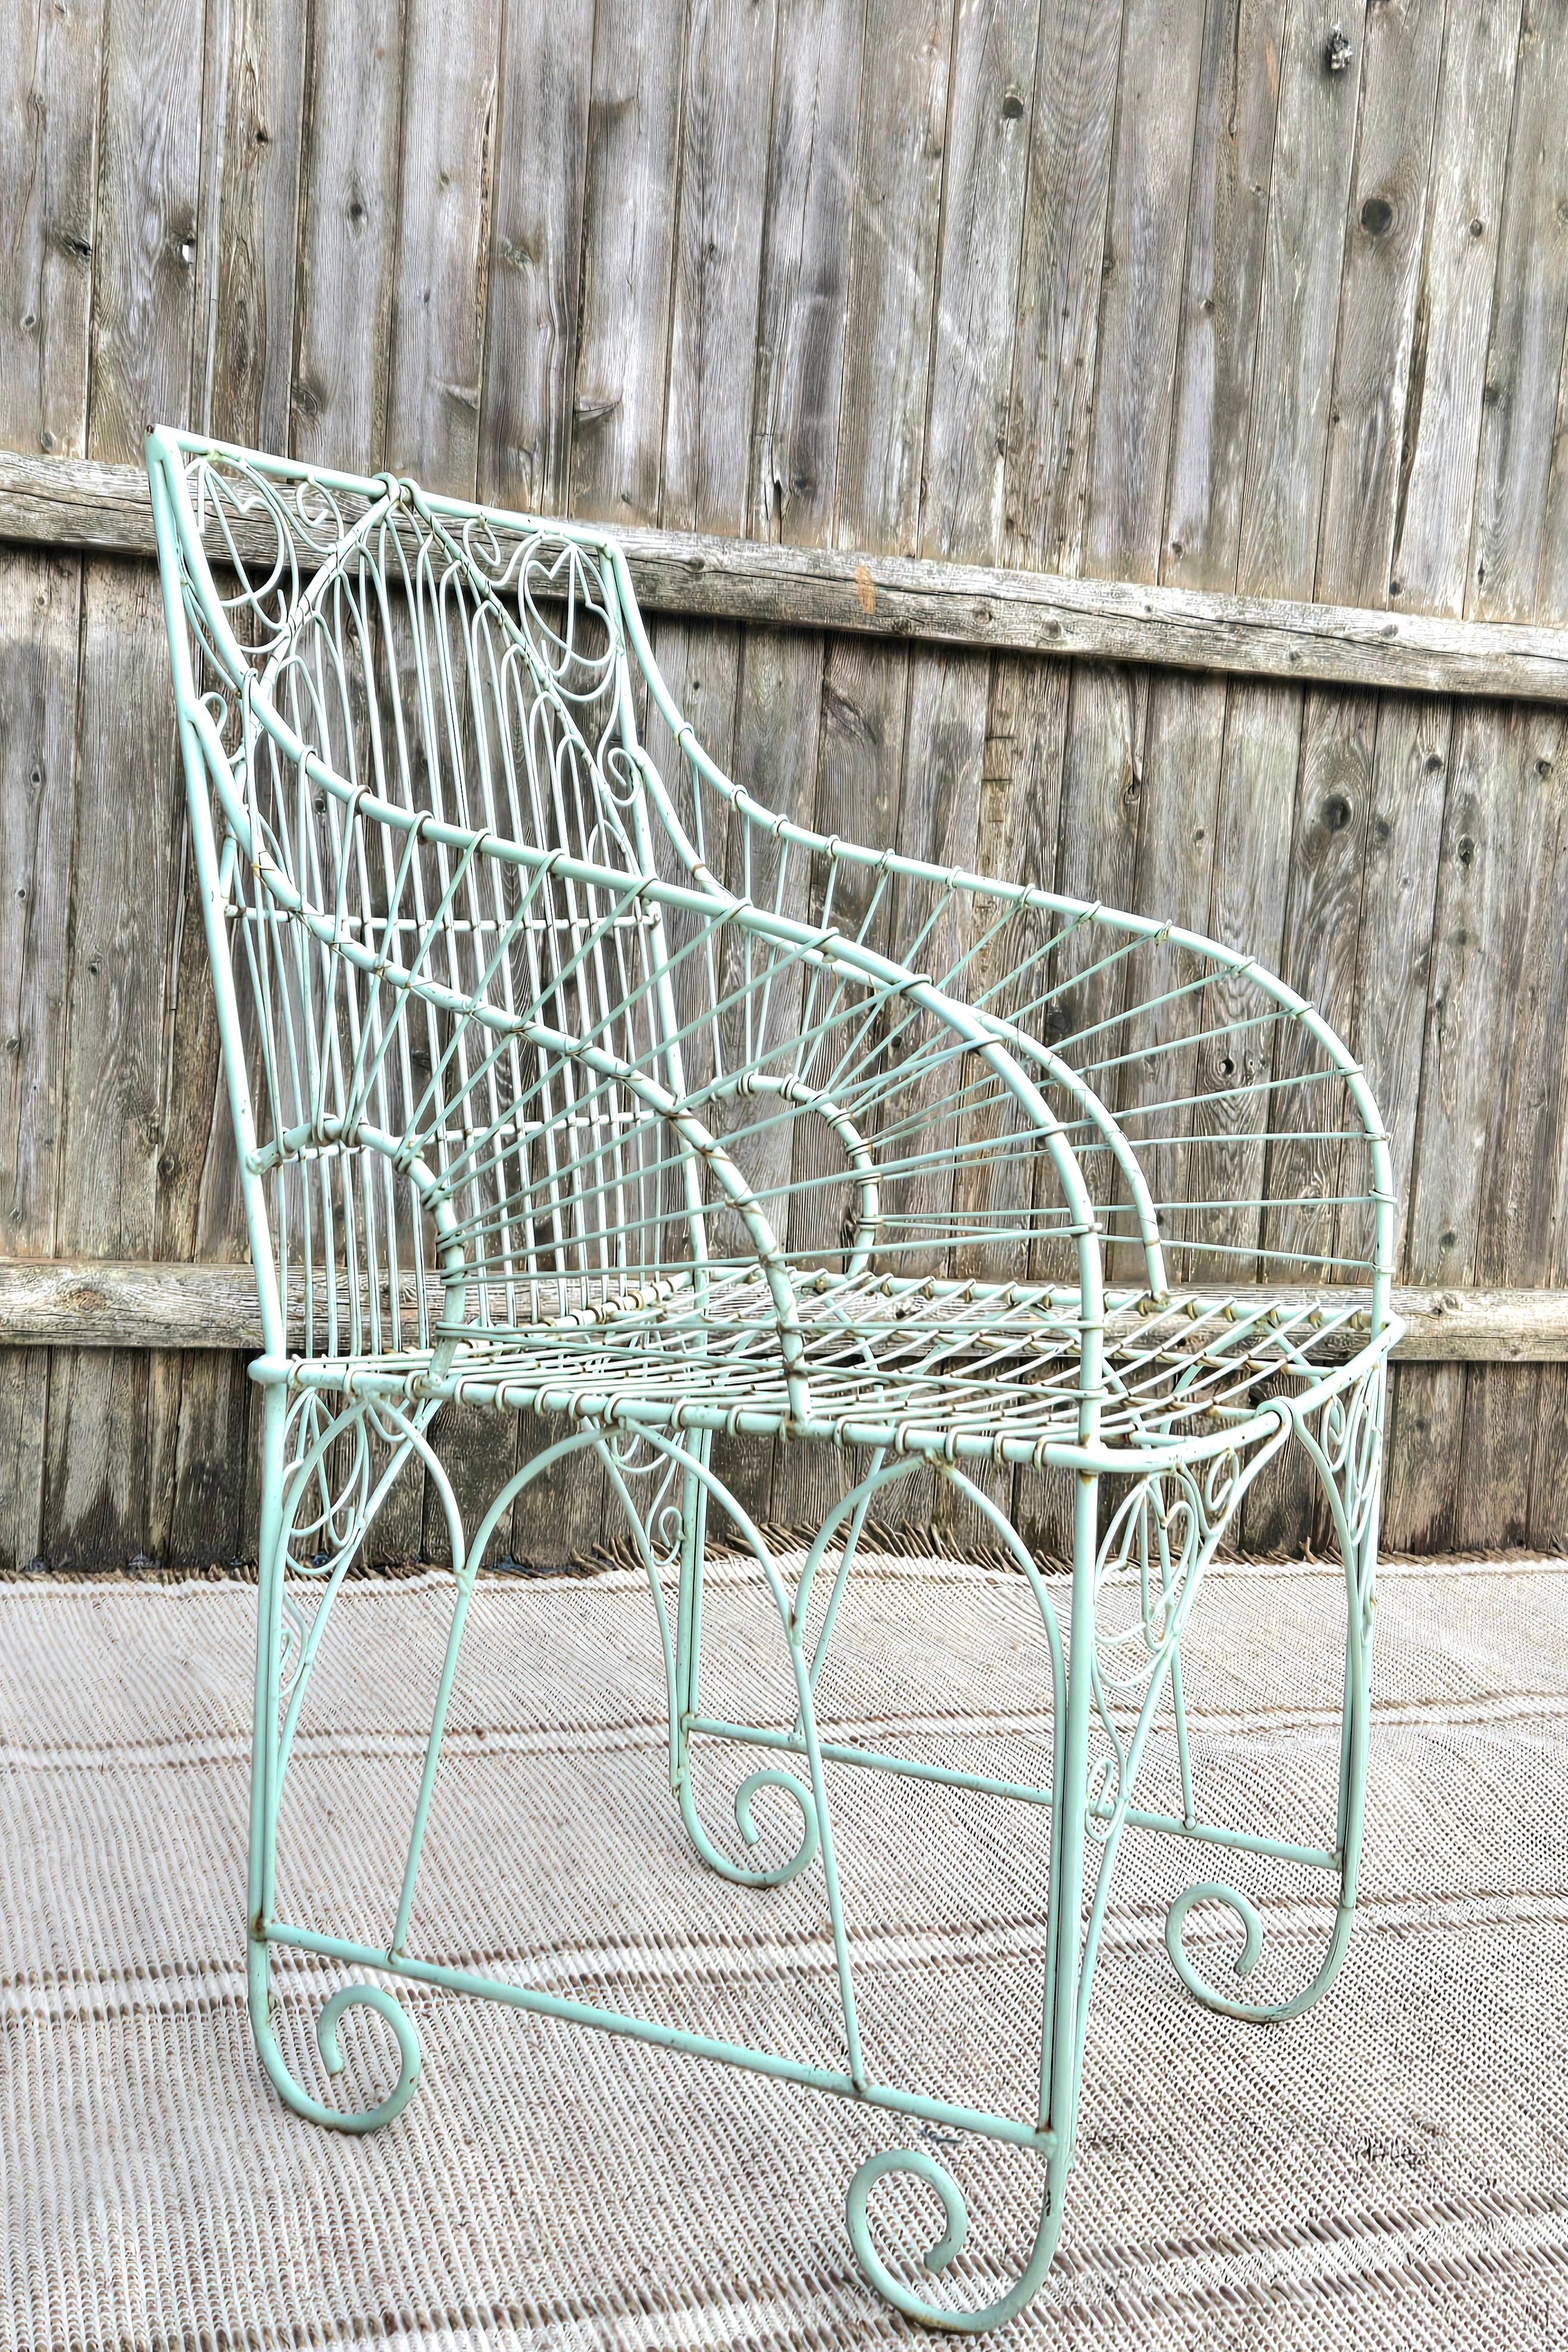 This is a beautiful vintage patio and garden chair with natural green patina. Purvhase as a single chair or the set of 6. An excellent choice for any patio, balcony, or pool.


Made of high-quality wrought iron and metal, this set of vintage wrought